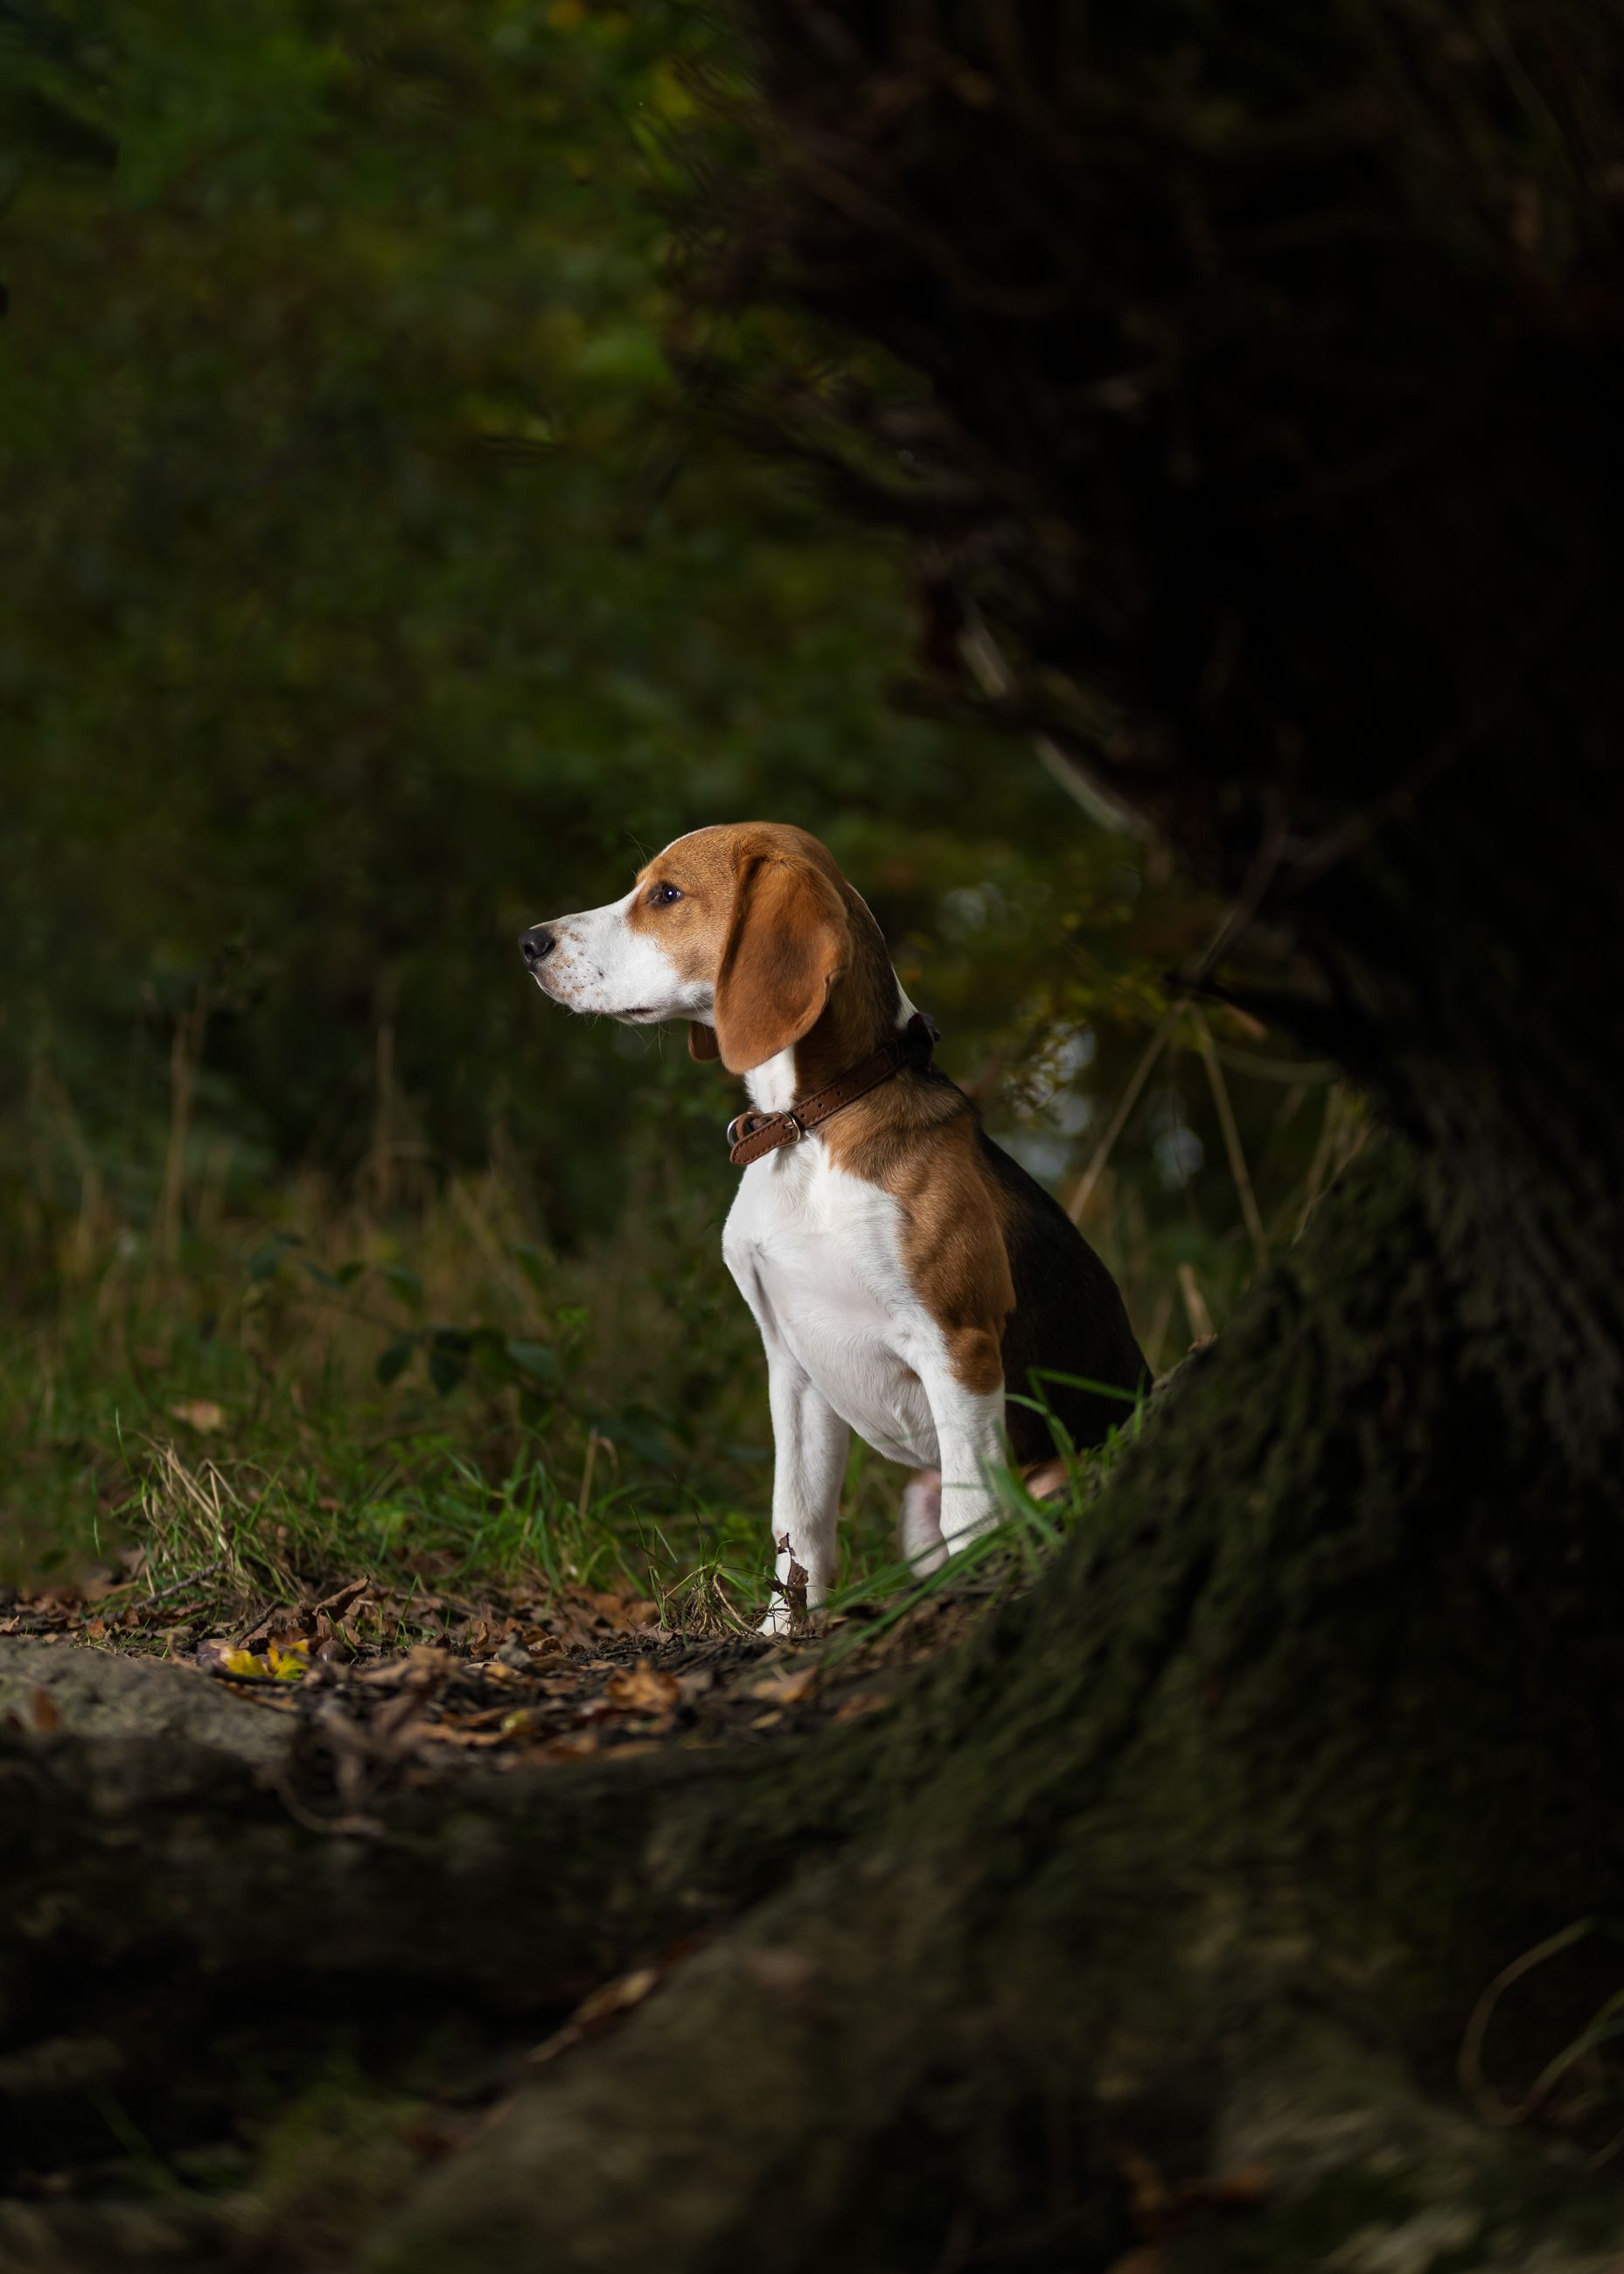 Moody image of a beagle in a forest